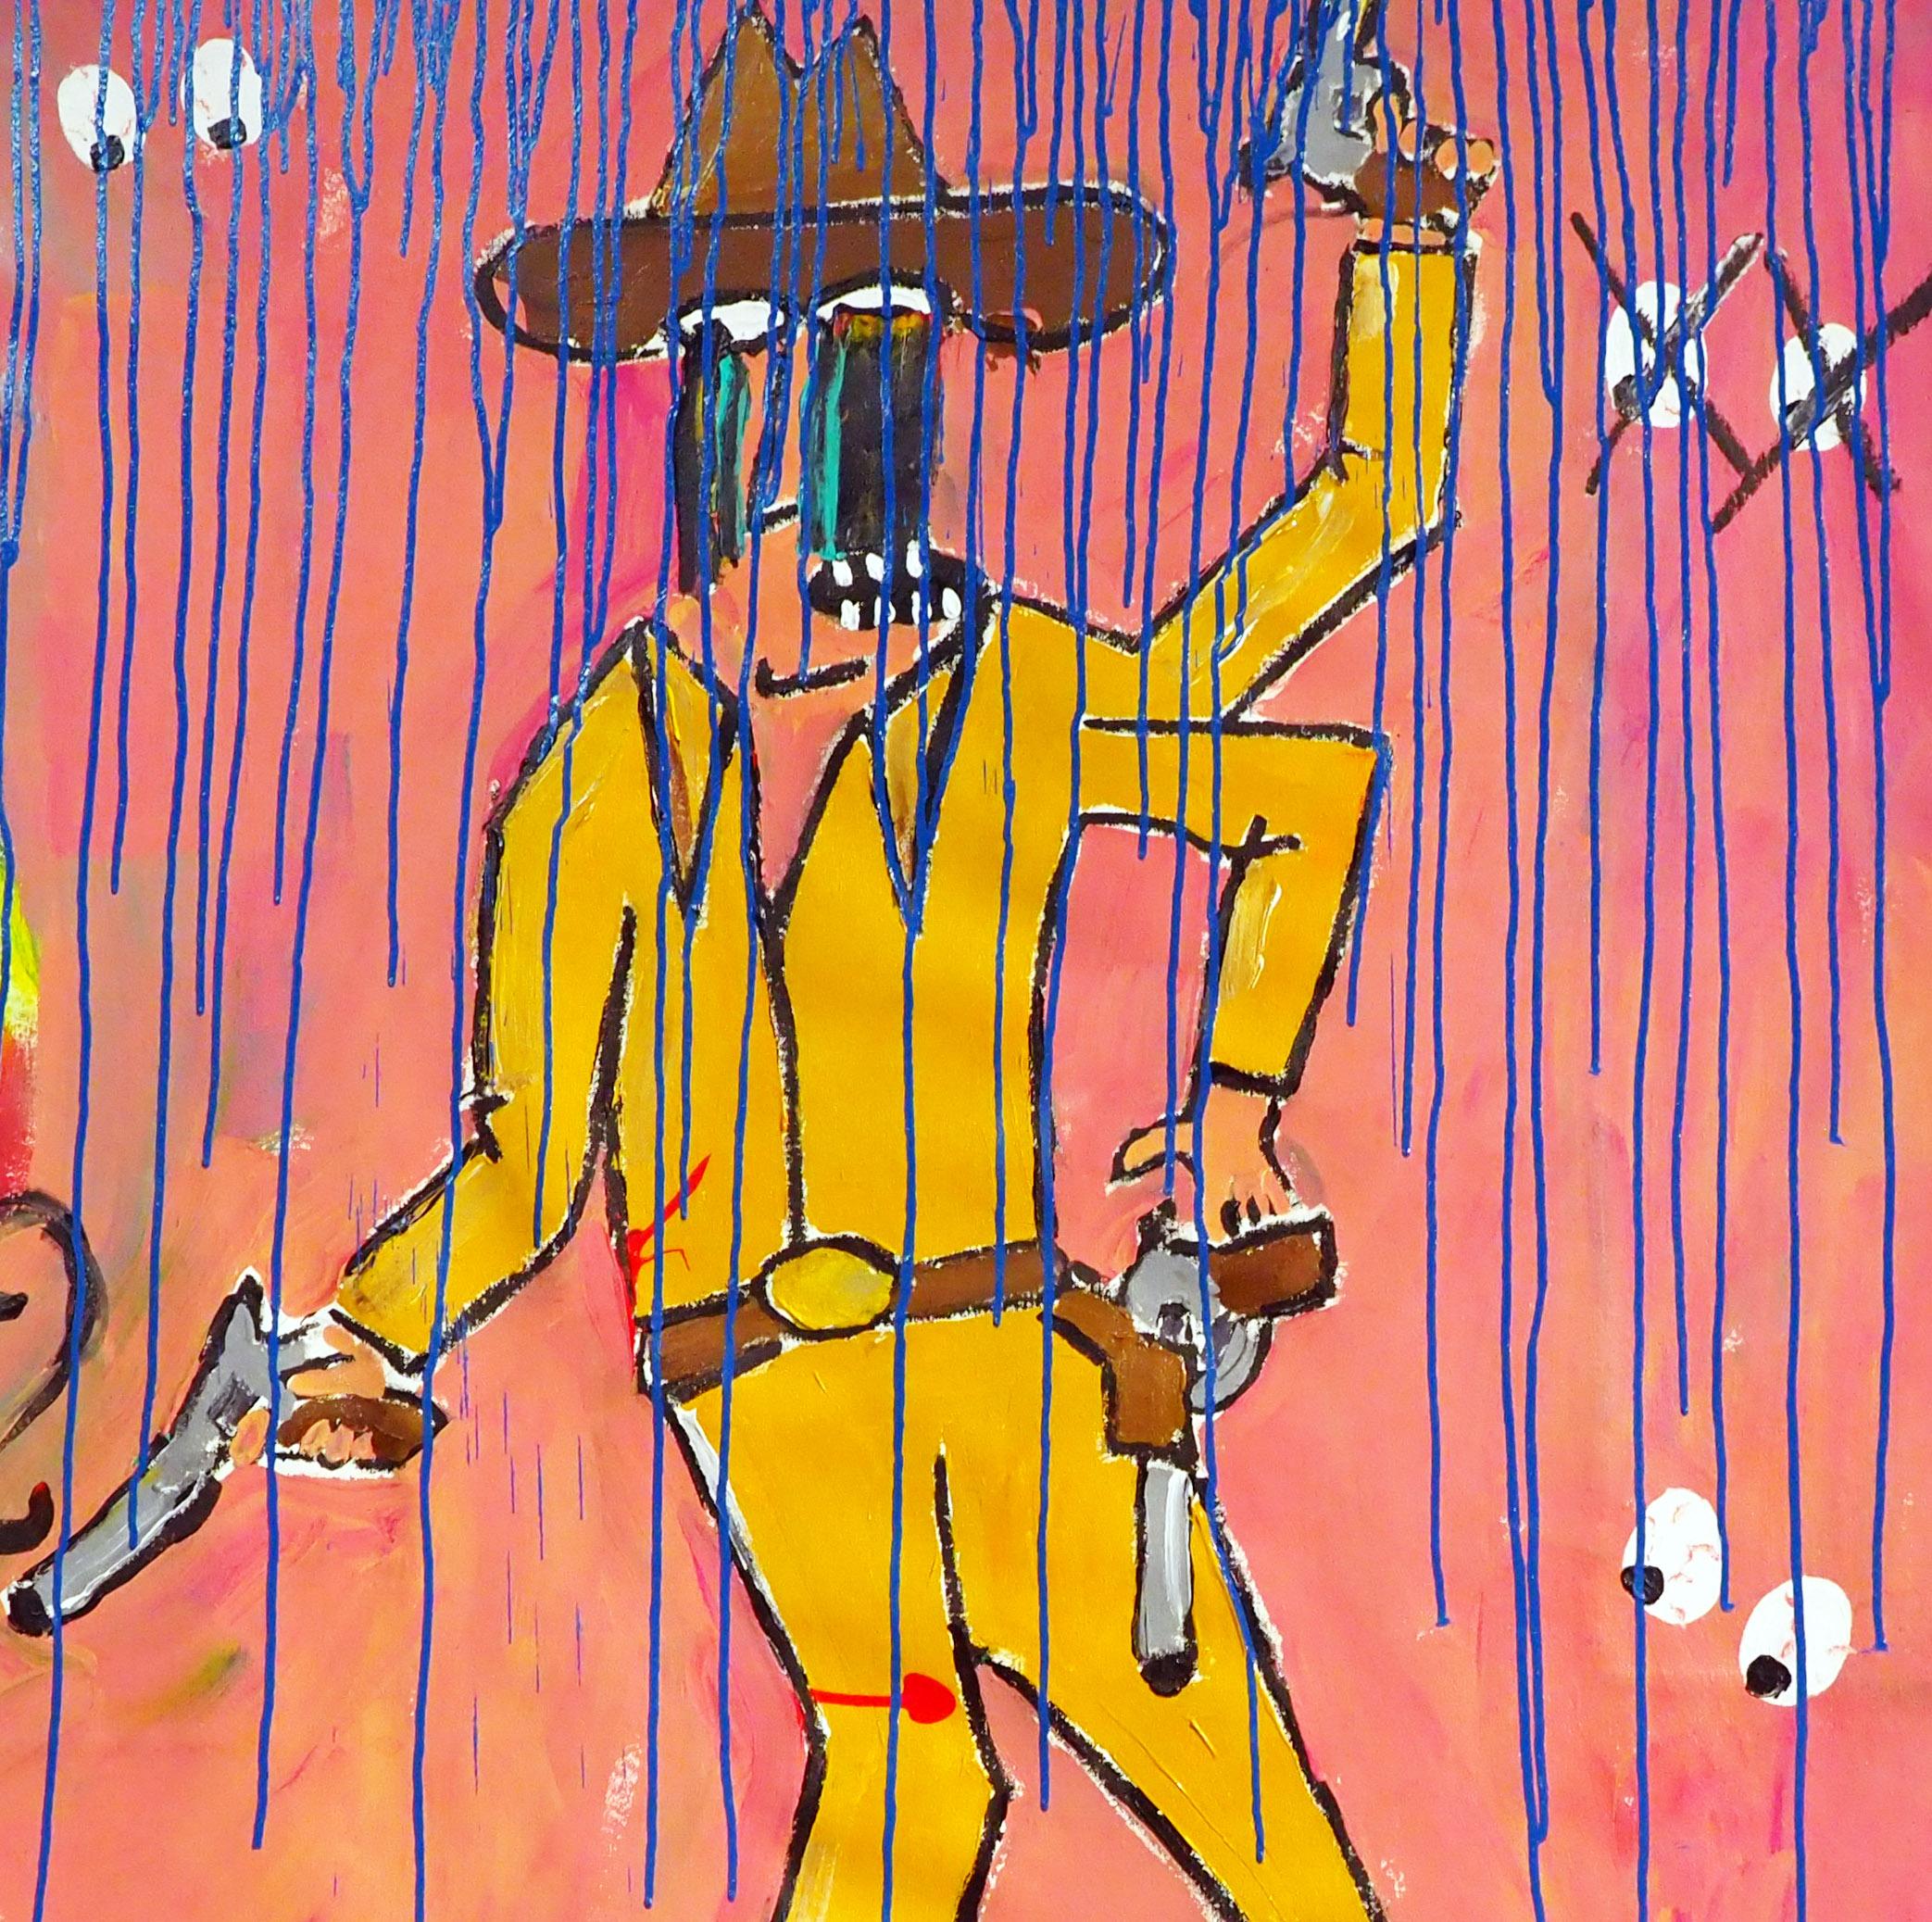 Cowboy in the Rain portrays an expressive portrait of a cowboy wearing a brown cowboy hat with blue hues of paint dripping over him on an unstretched canvas. The cowboy’s eyes look to the floating eyes as a rainbow wave floats oto his left,